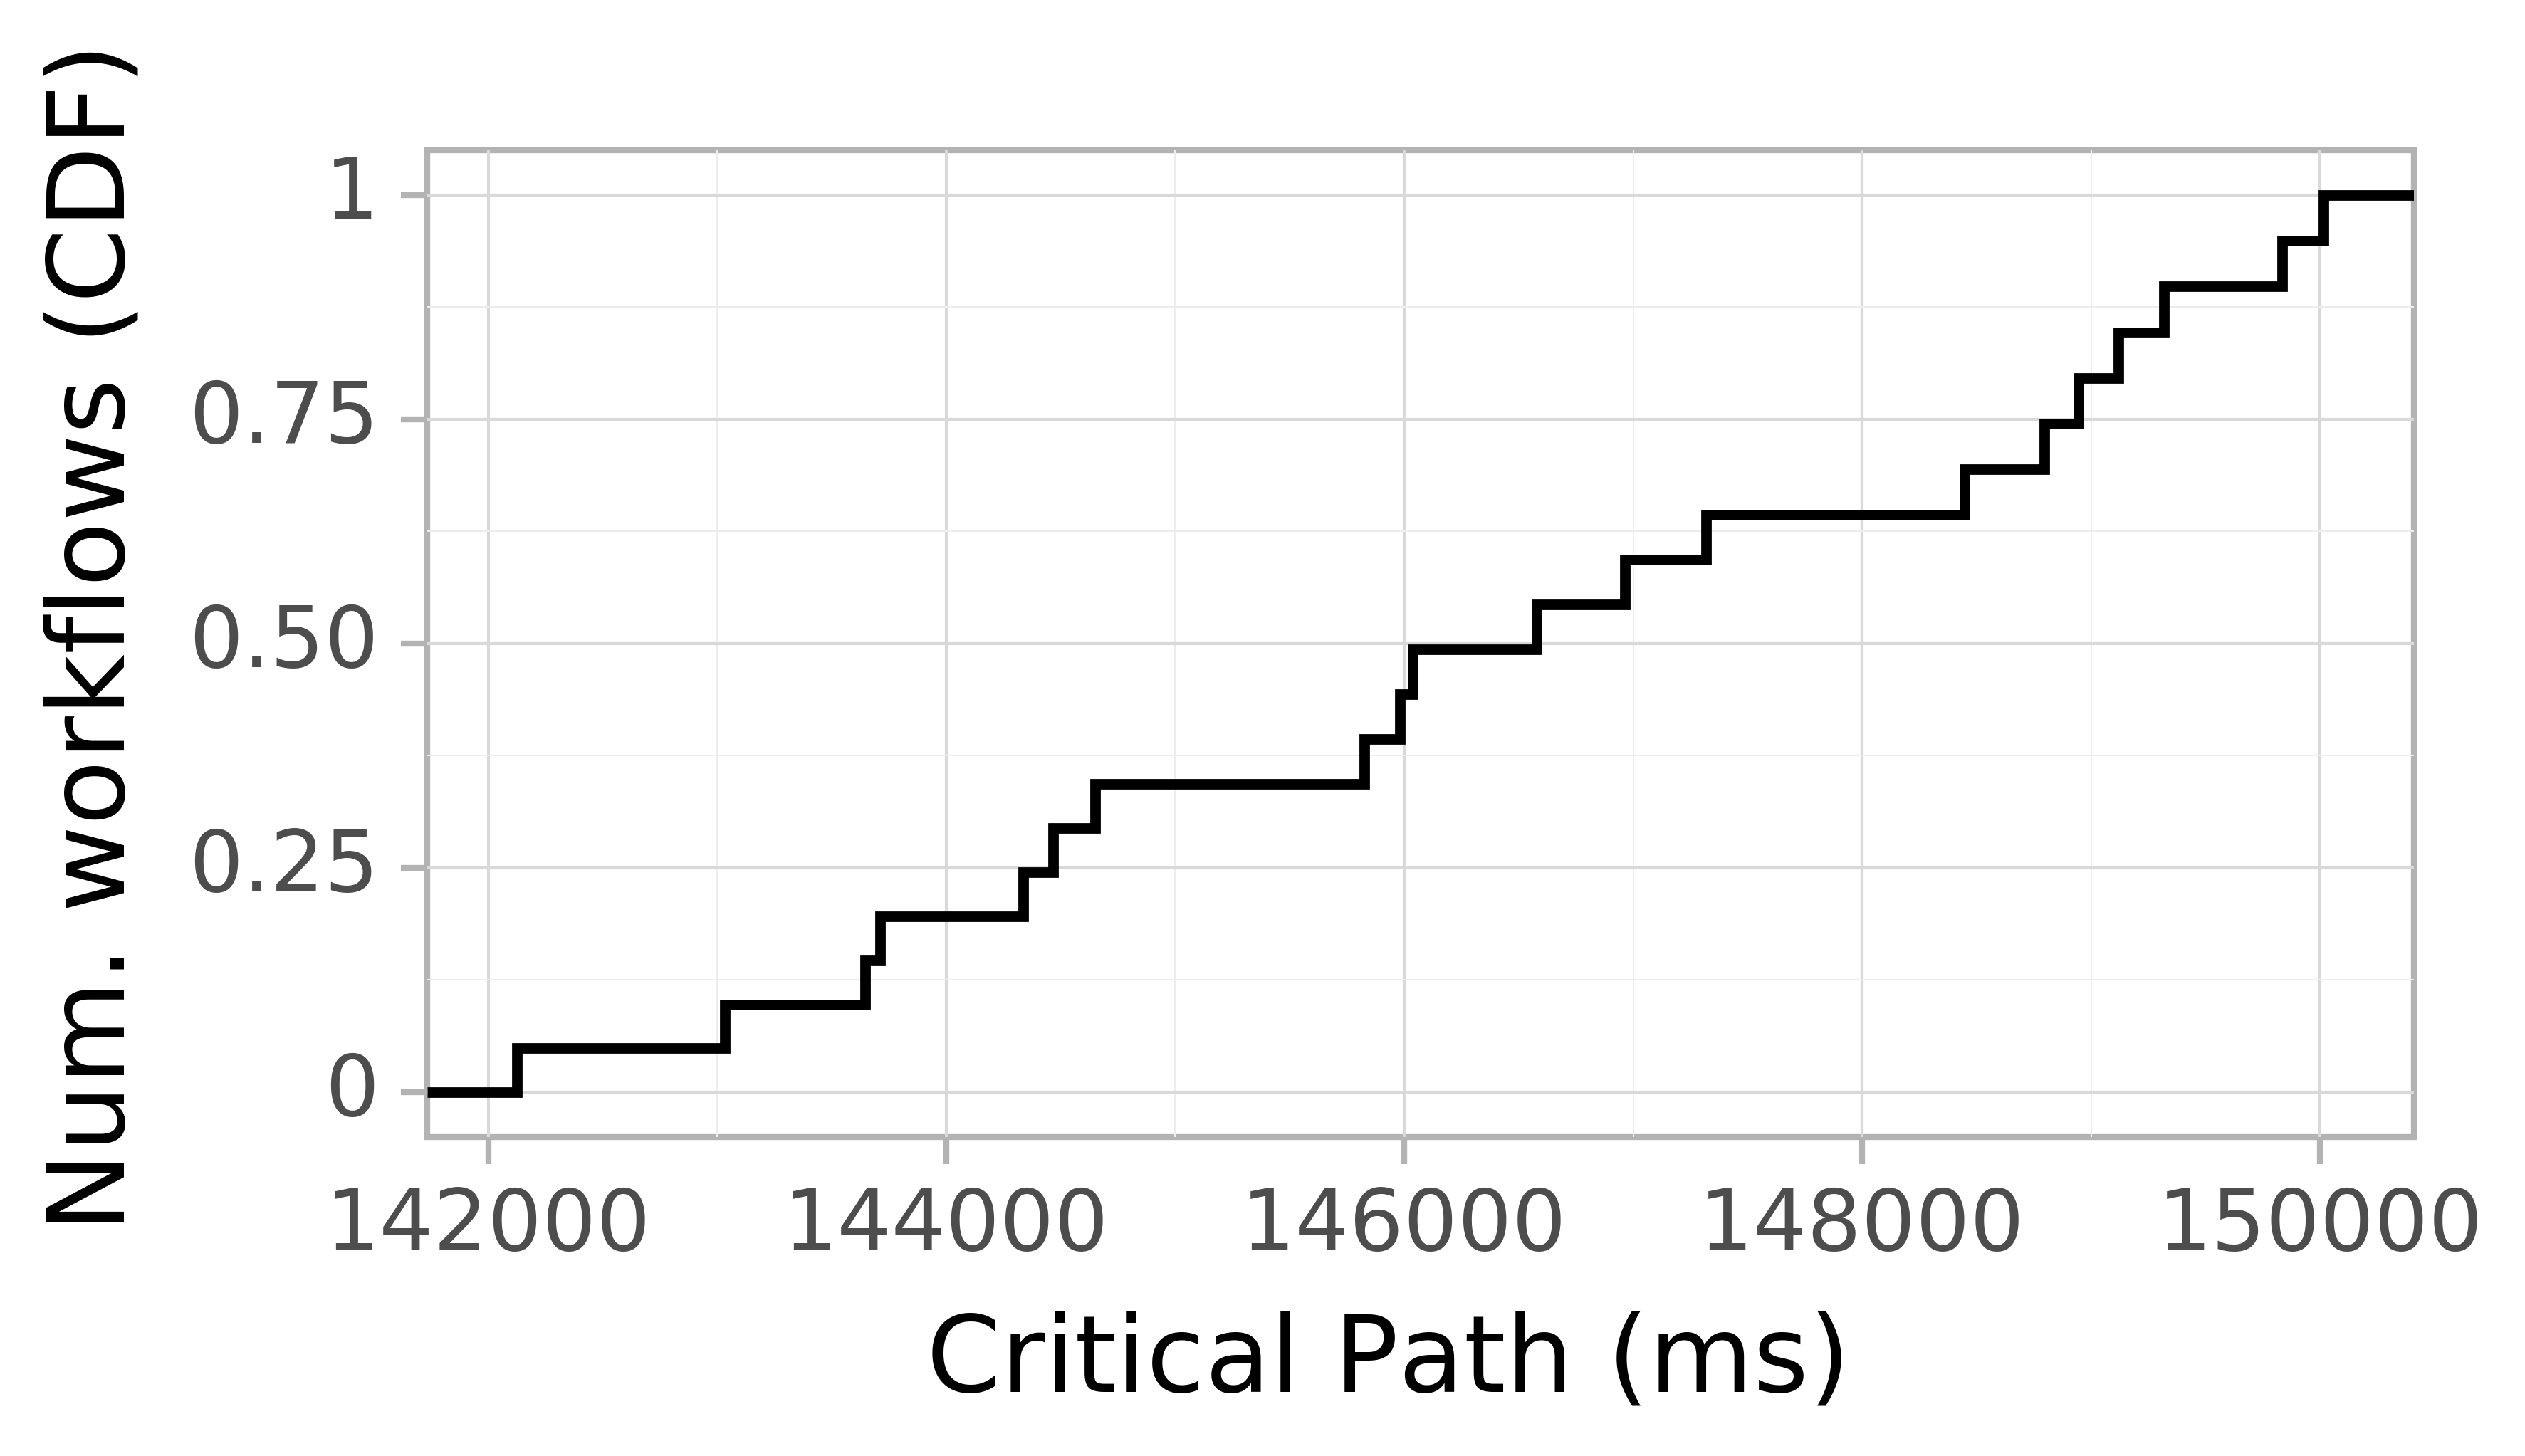 Job runtime CDF graph for the askalon-new_ee5 trace.